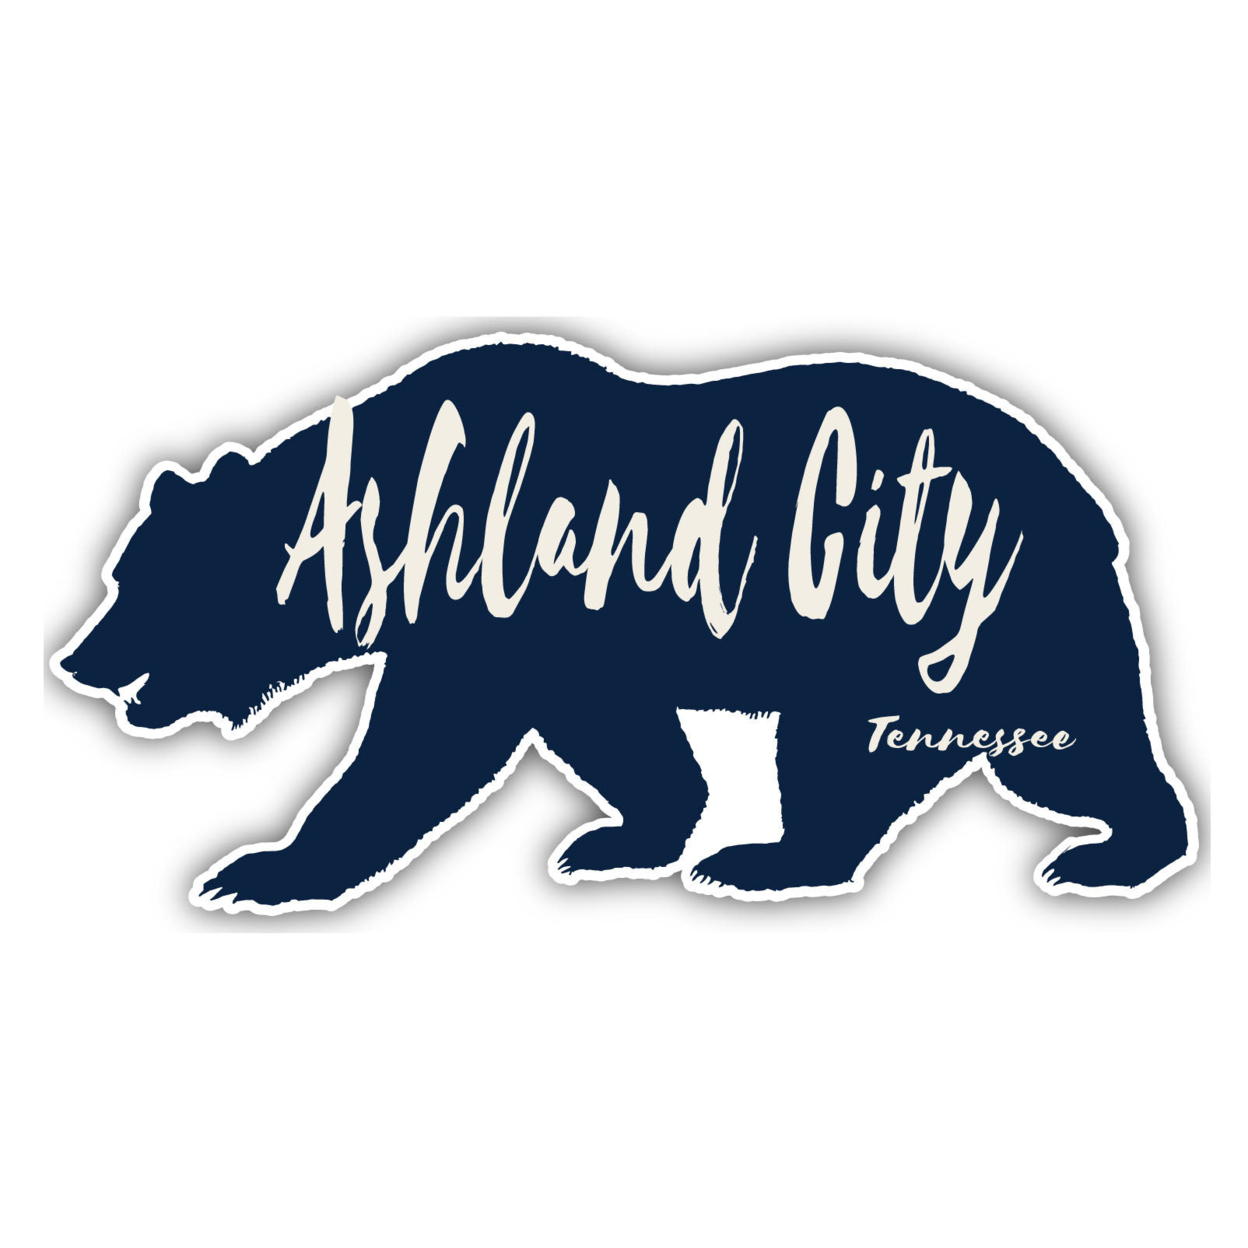 Ashland City Tennessee Souvenir Decorative Stickers (Choose Theme And Size) - 4-Pack, 12-Inch, Bear